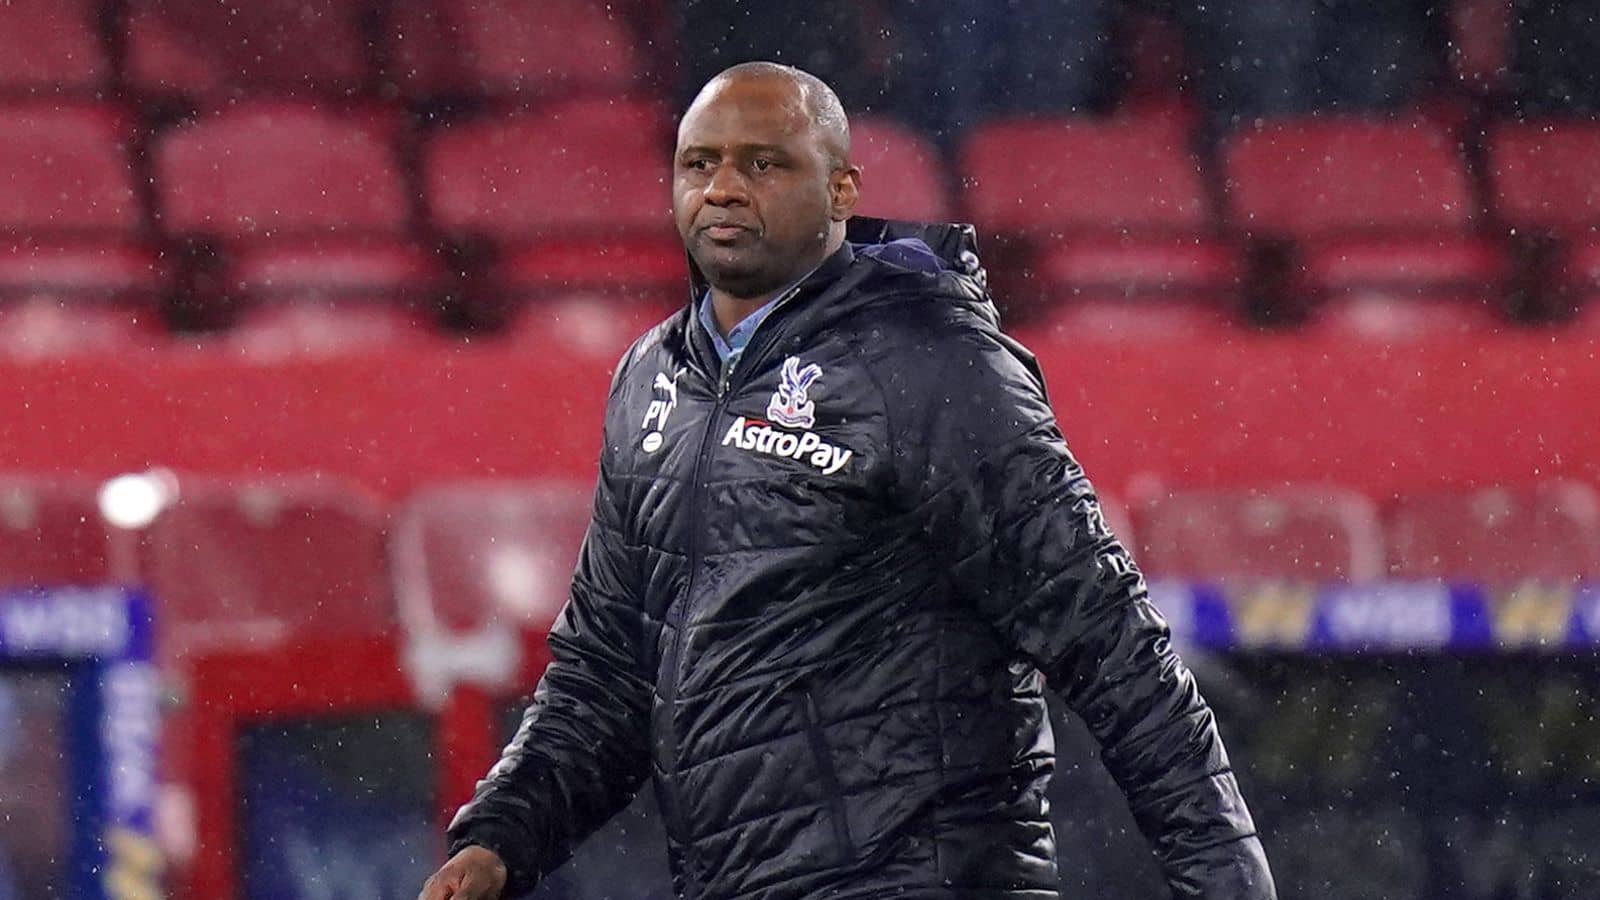 Vieira opens up about how Manchester City has influenced him to be a football manager